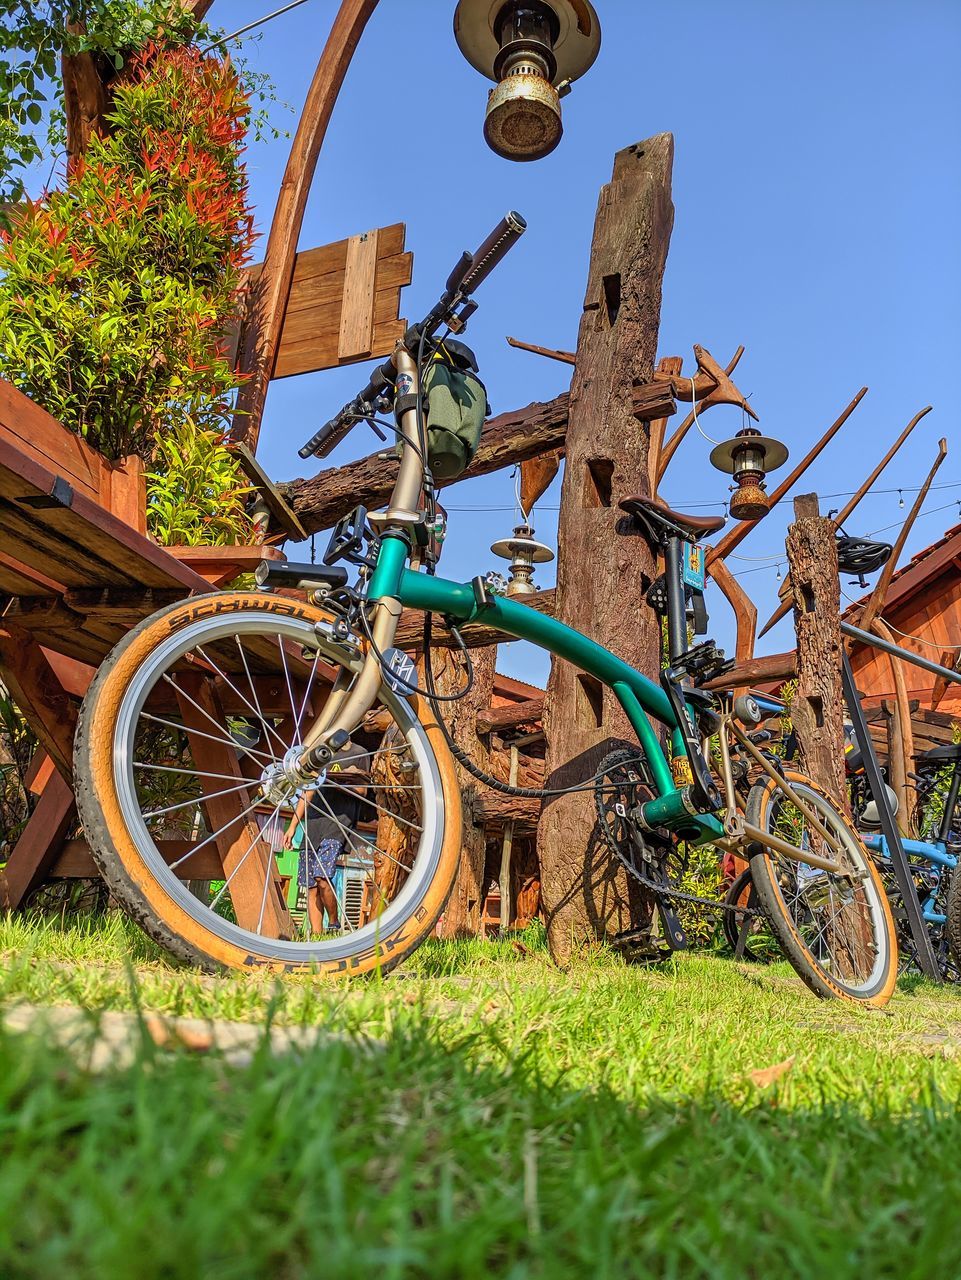 transportation, bicycle, plant, grass, nature, mode of transportation, vehicle, sky, no people, day, sports equipment, land vehicle, blue, outdoors, architecture, clear sky, mountain bike, wheel, cycle sport, travel, tree, green, sunlight, basket, field, sports